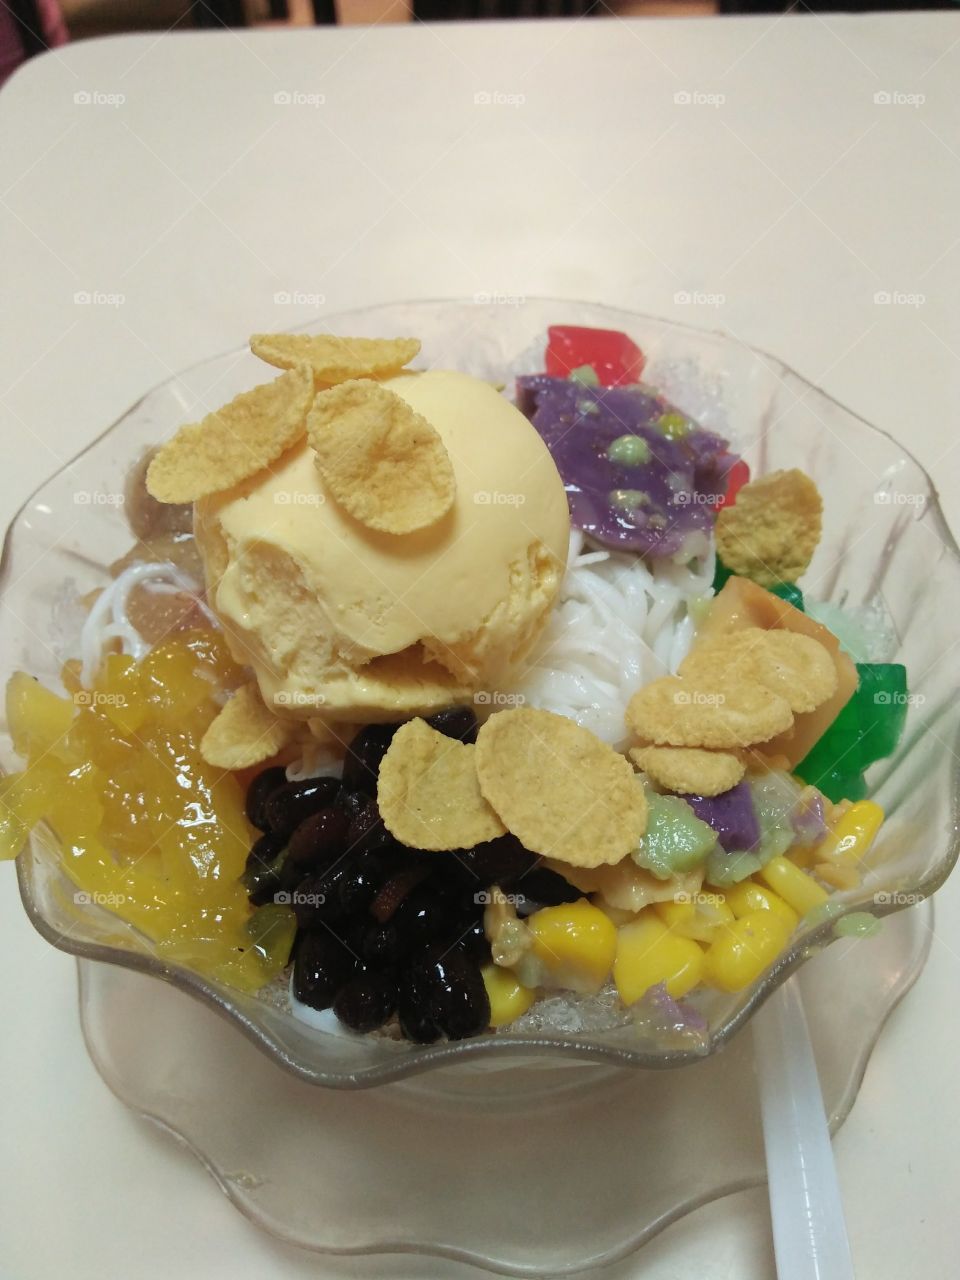 Im proud to show you our one of the best desserts! Halo-halo!